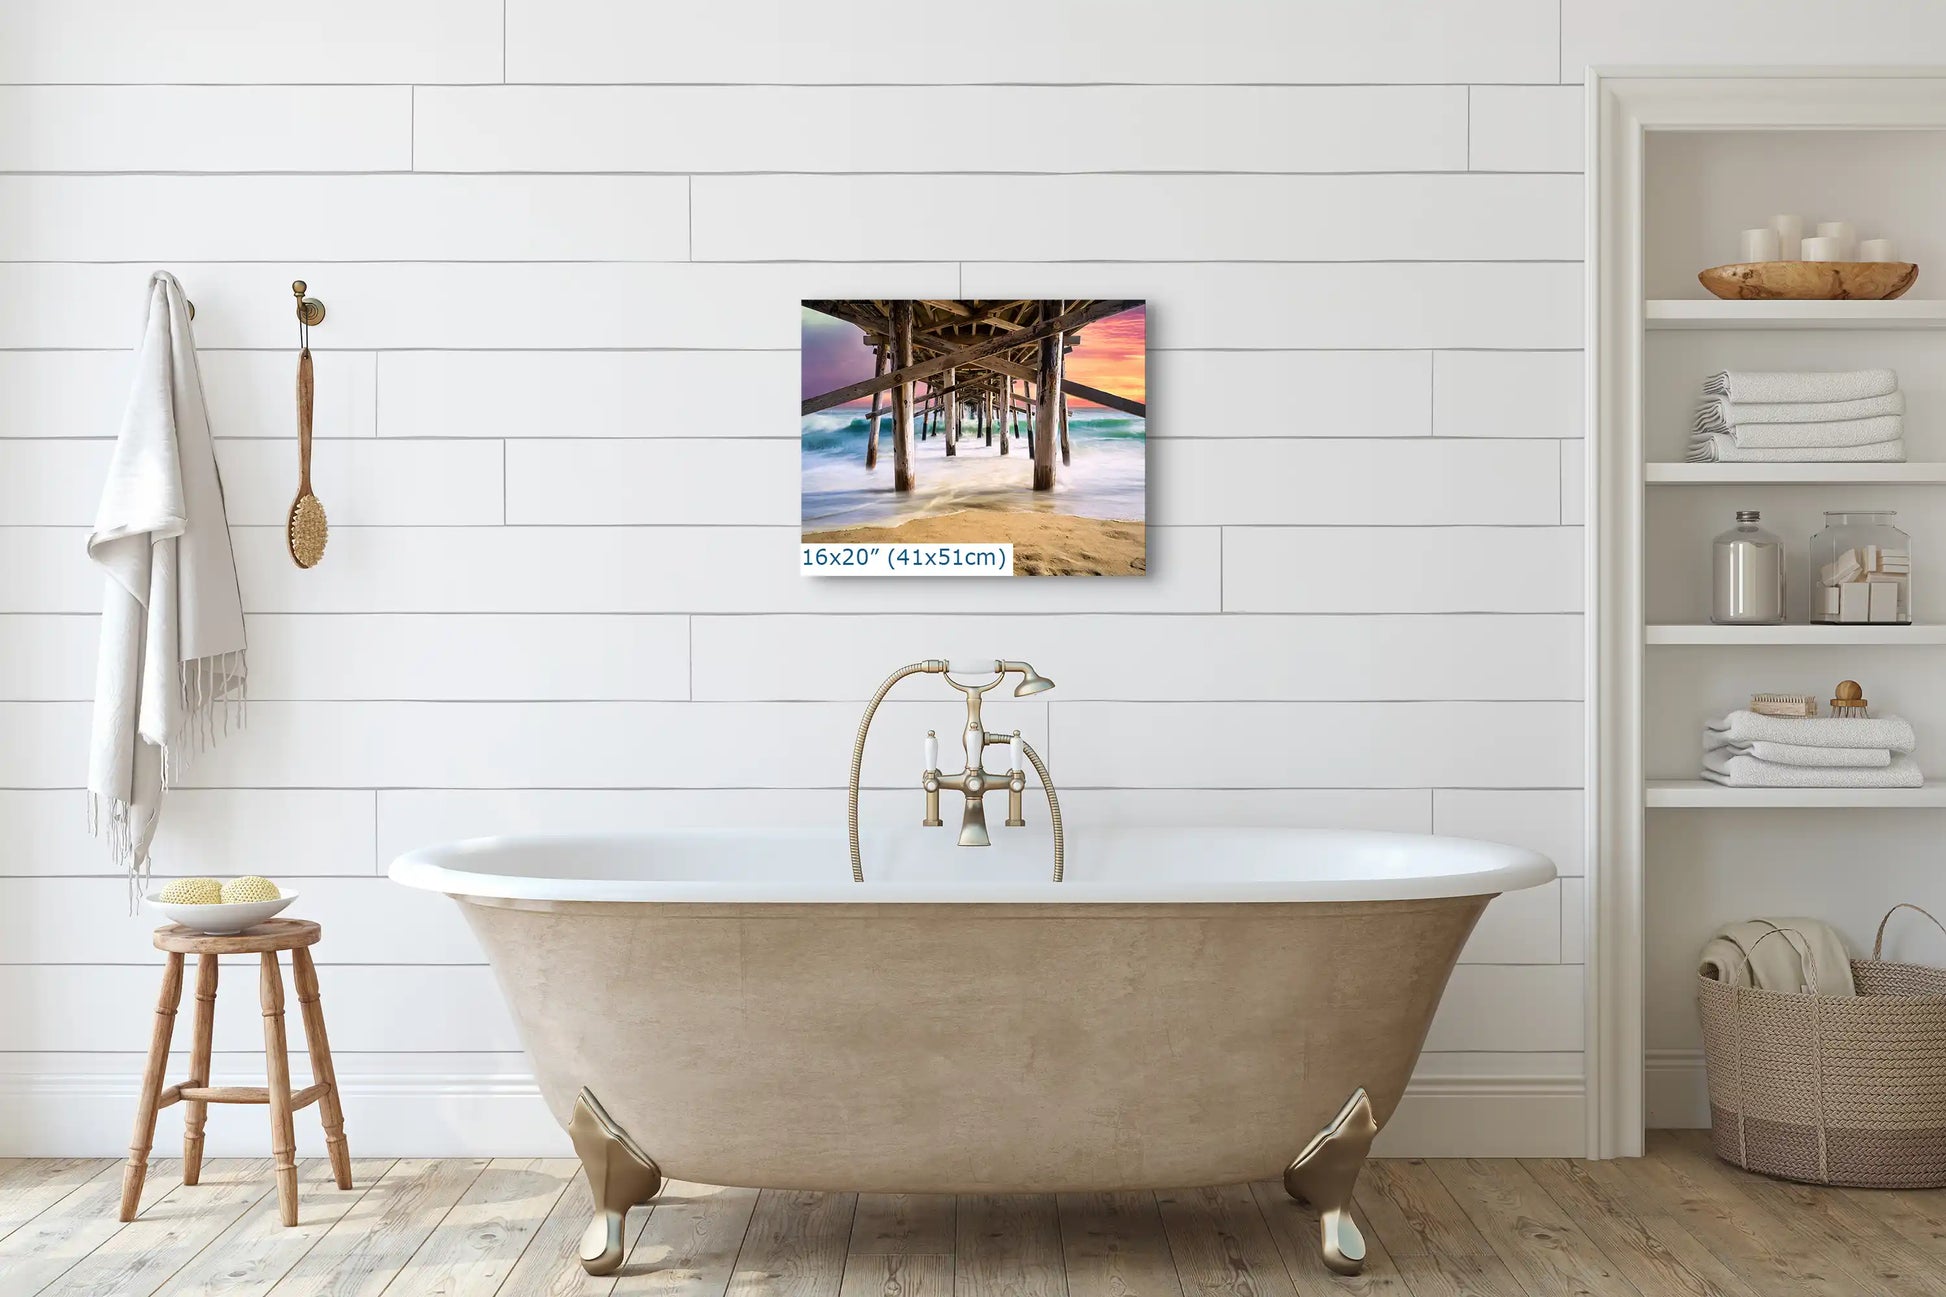 16x20-inch wall art of Balboa Pier at sunset in a bathroom setting, offering a serene ocean view that complements the peaceful ambiance.